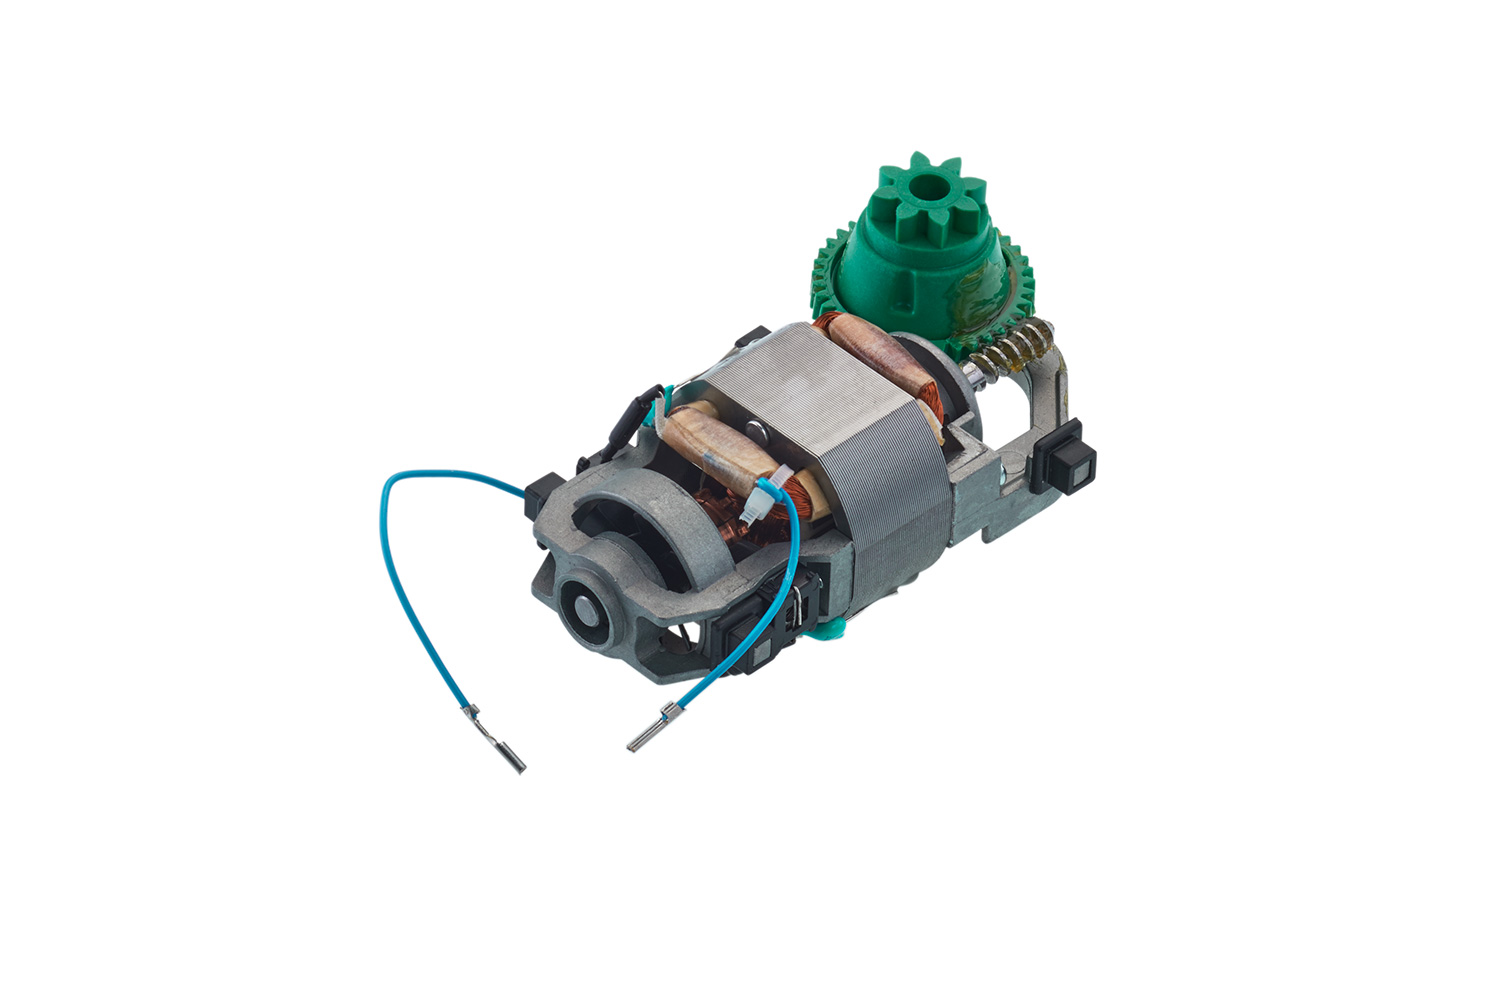 Motor with a green gear (left-handed operated)